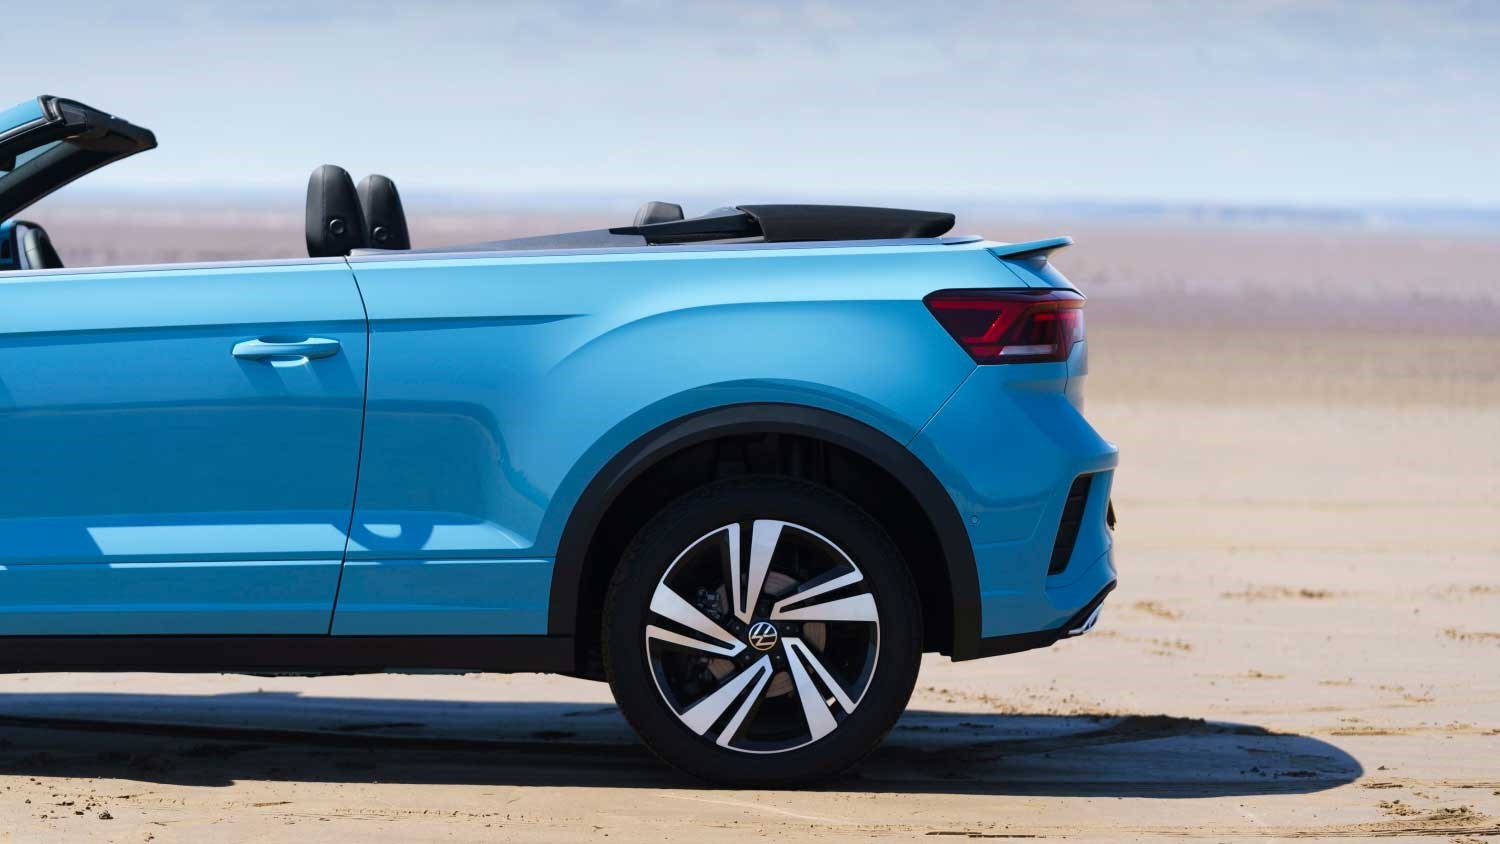 Introduce 61+ images volkswagen t-roc cabriolet review - In ...